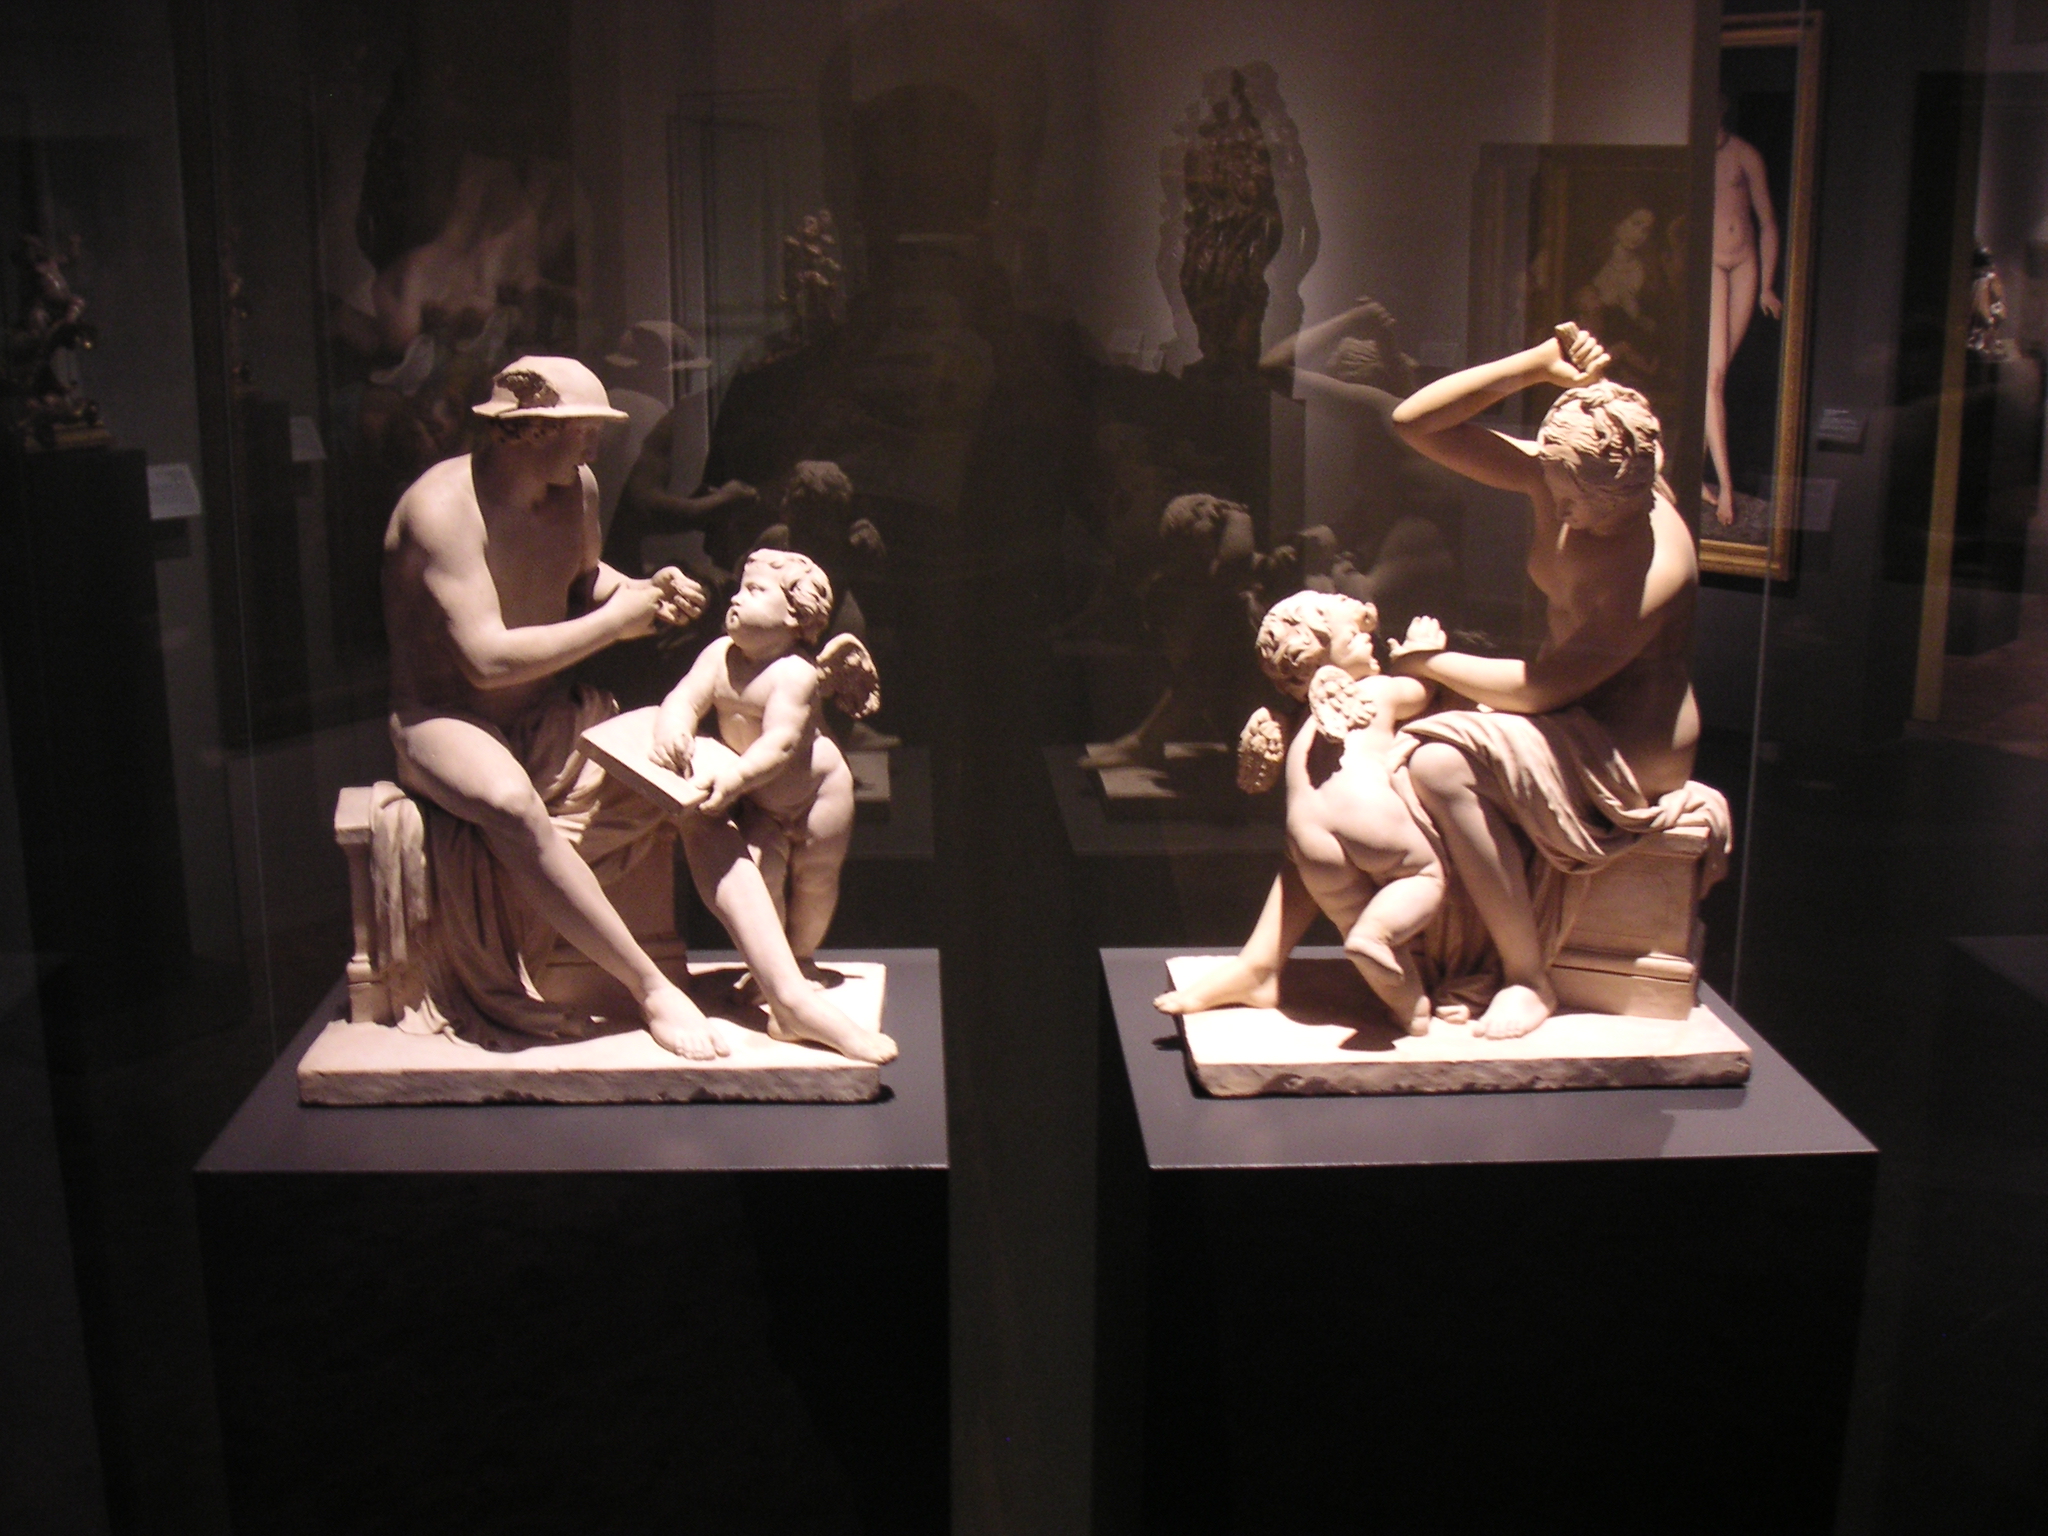 statues in a museum case on display of their past